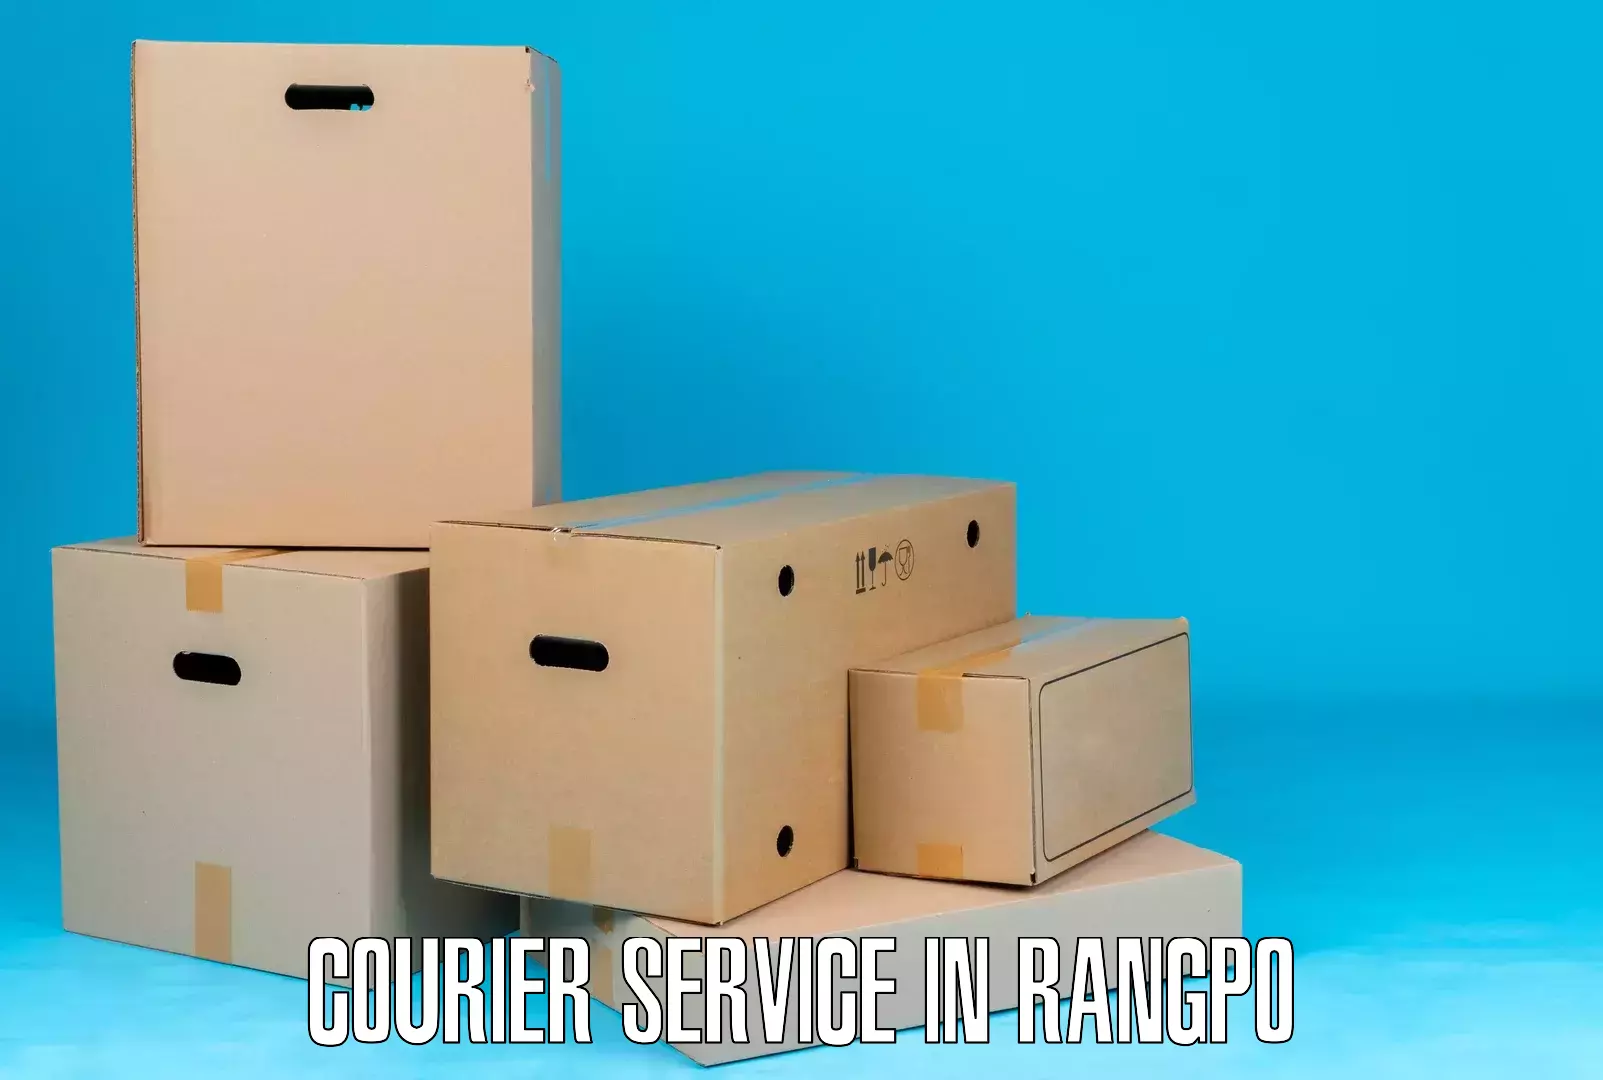 Express postal services in Rangpo